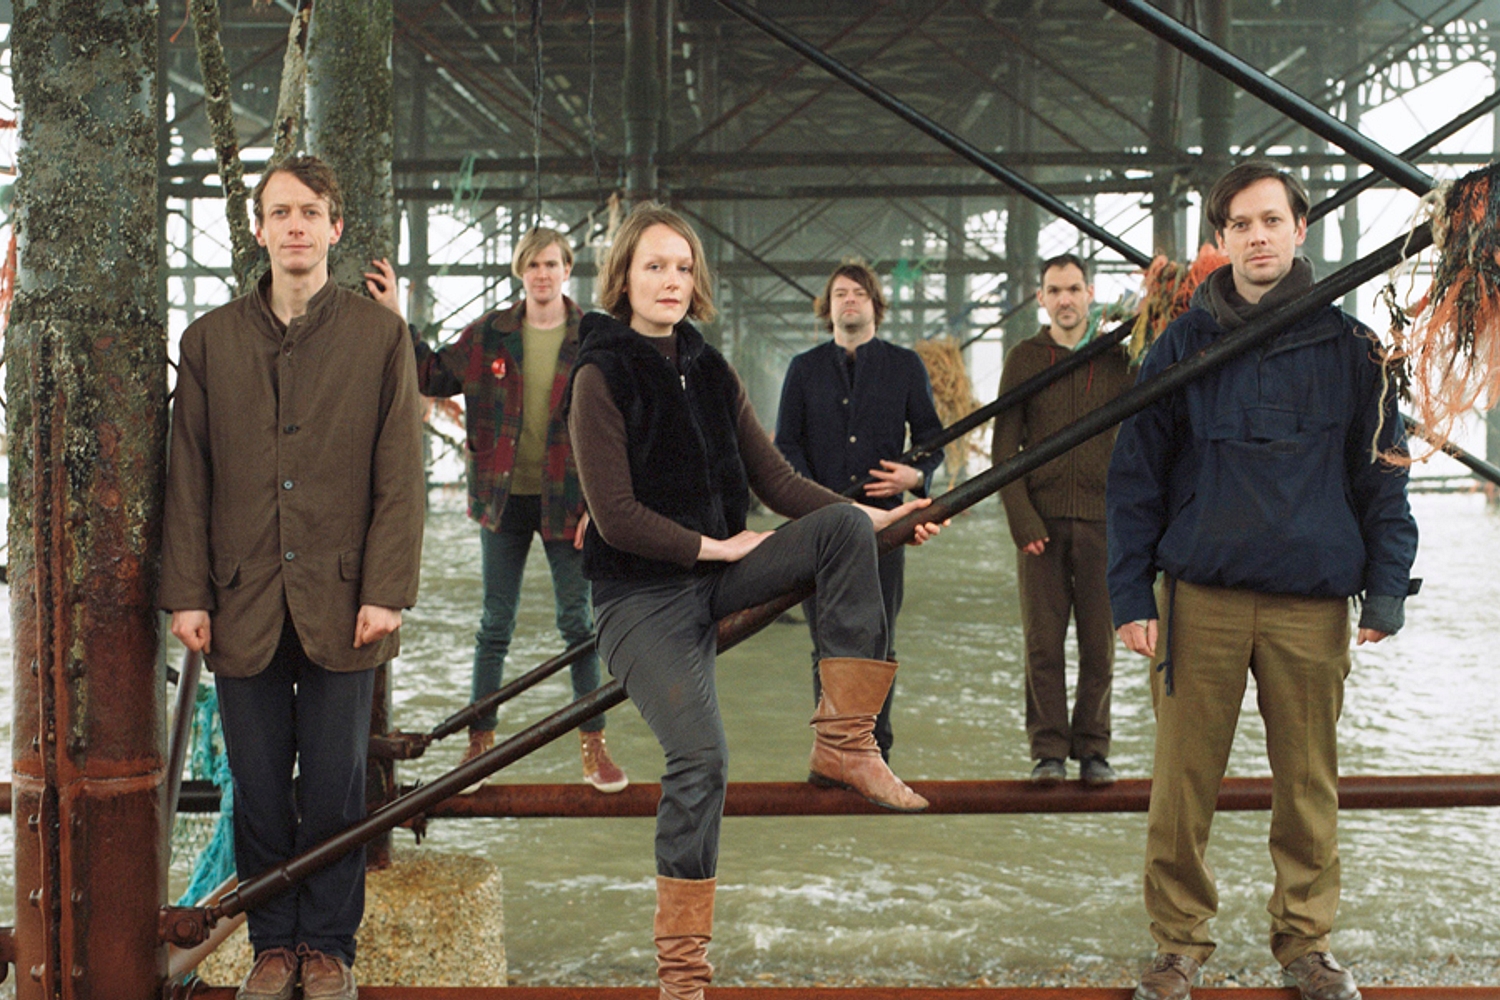 British Sea Power to play debut album in full at London show